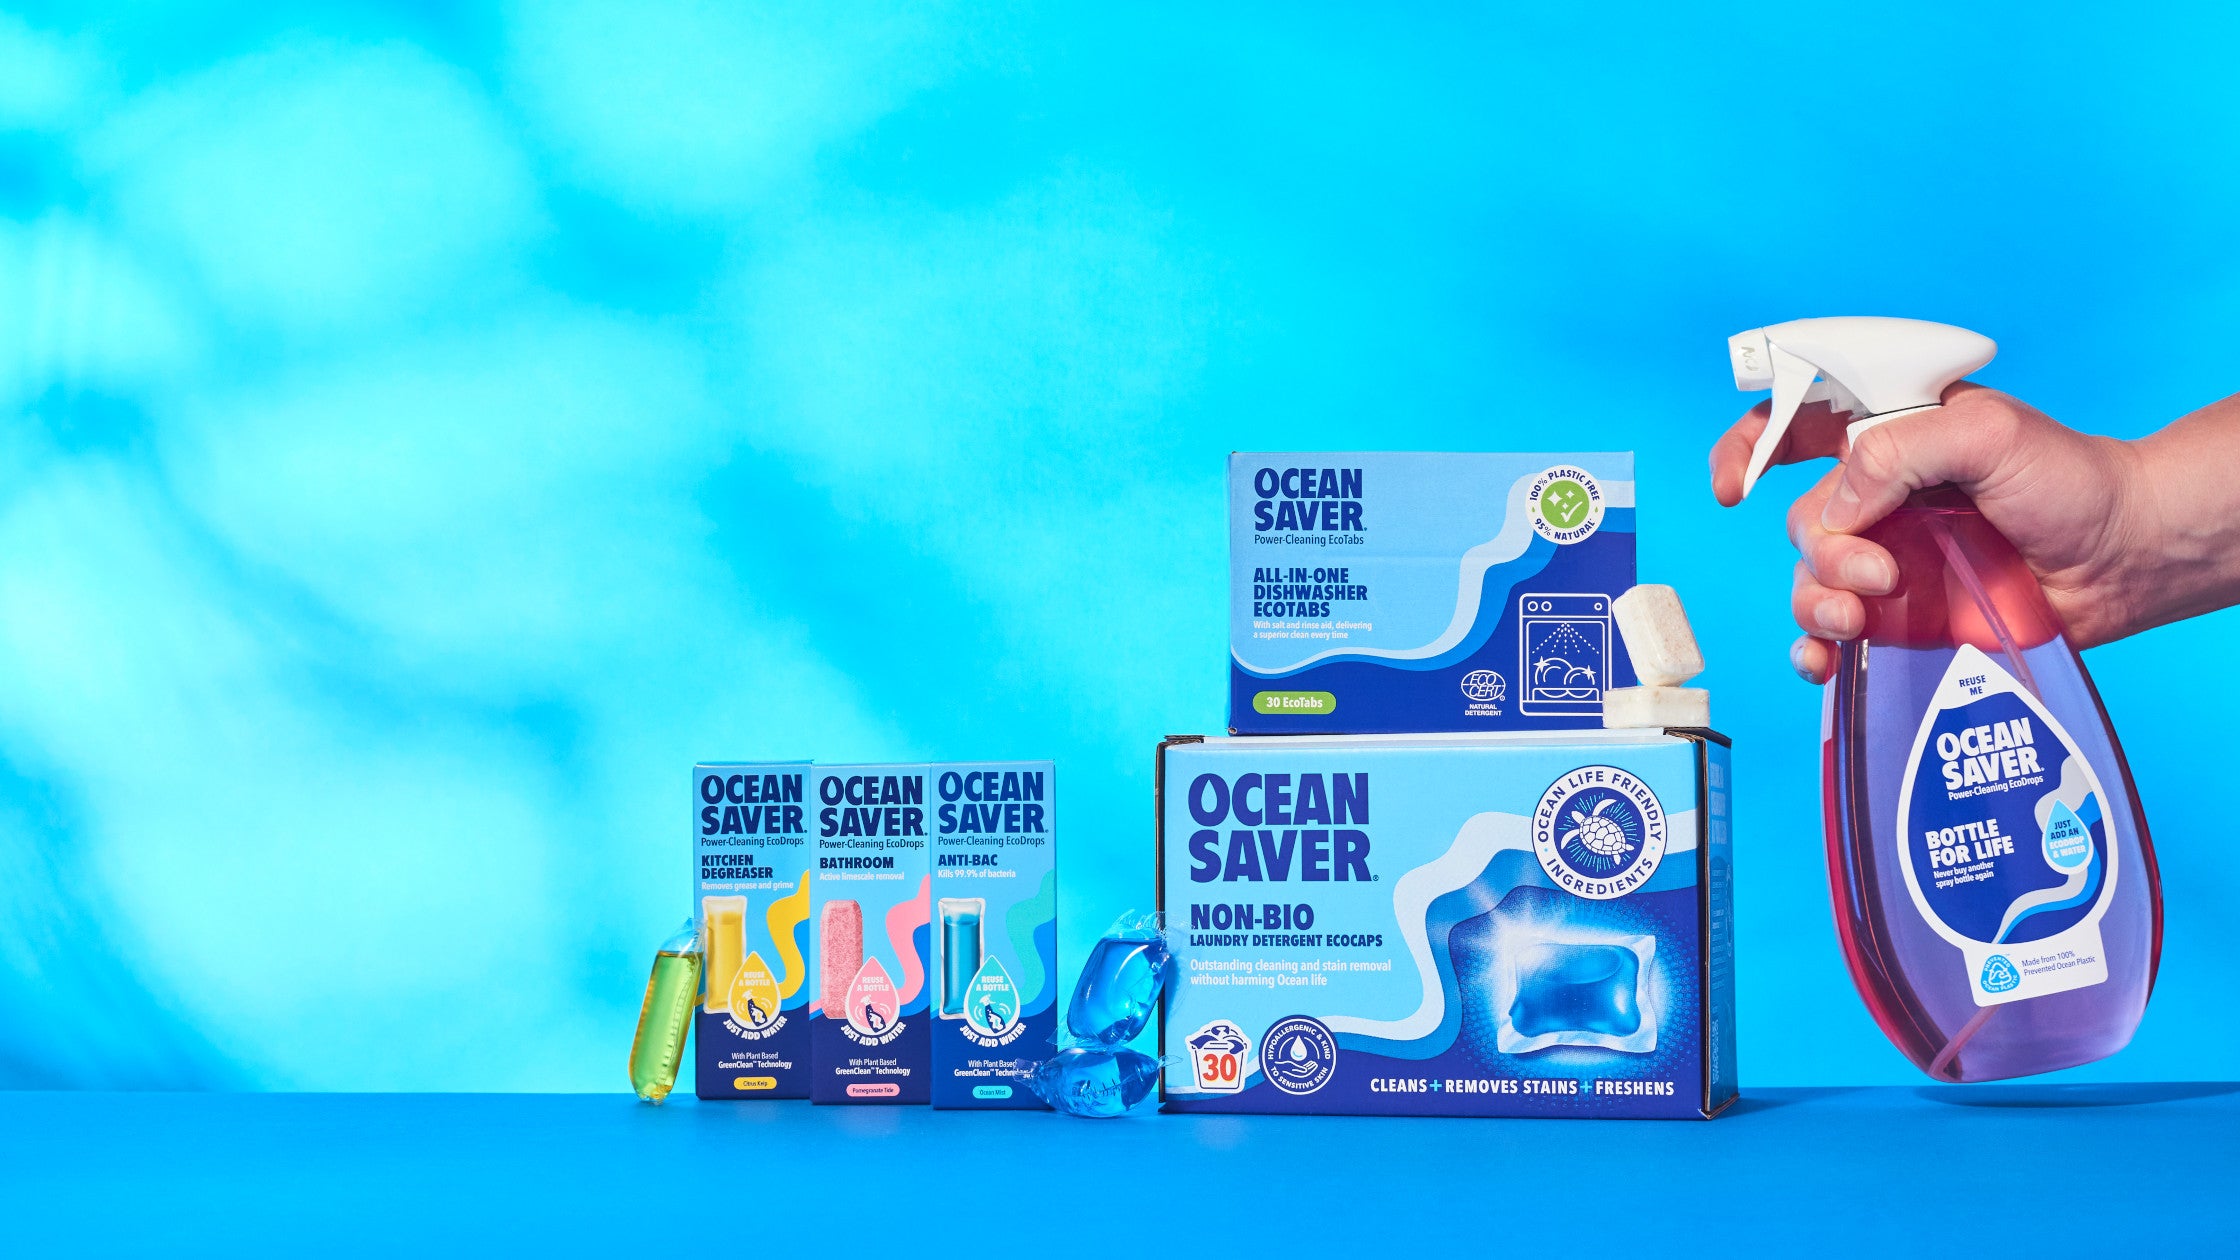 Clean Seas and Clean Homes with OceanSaver